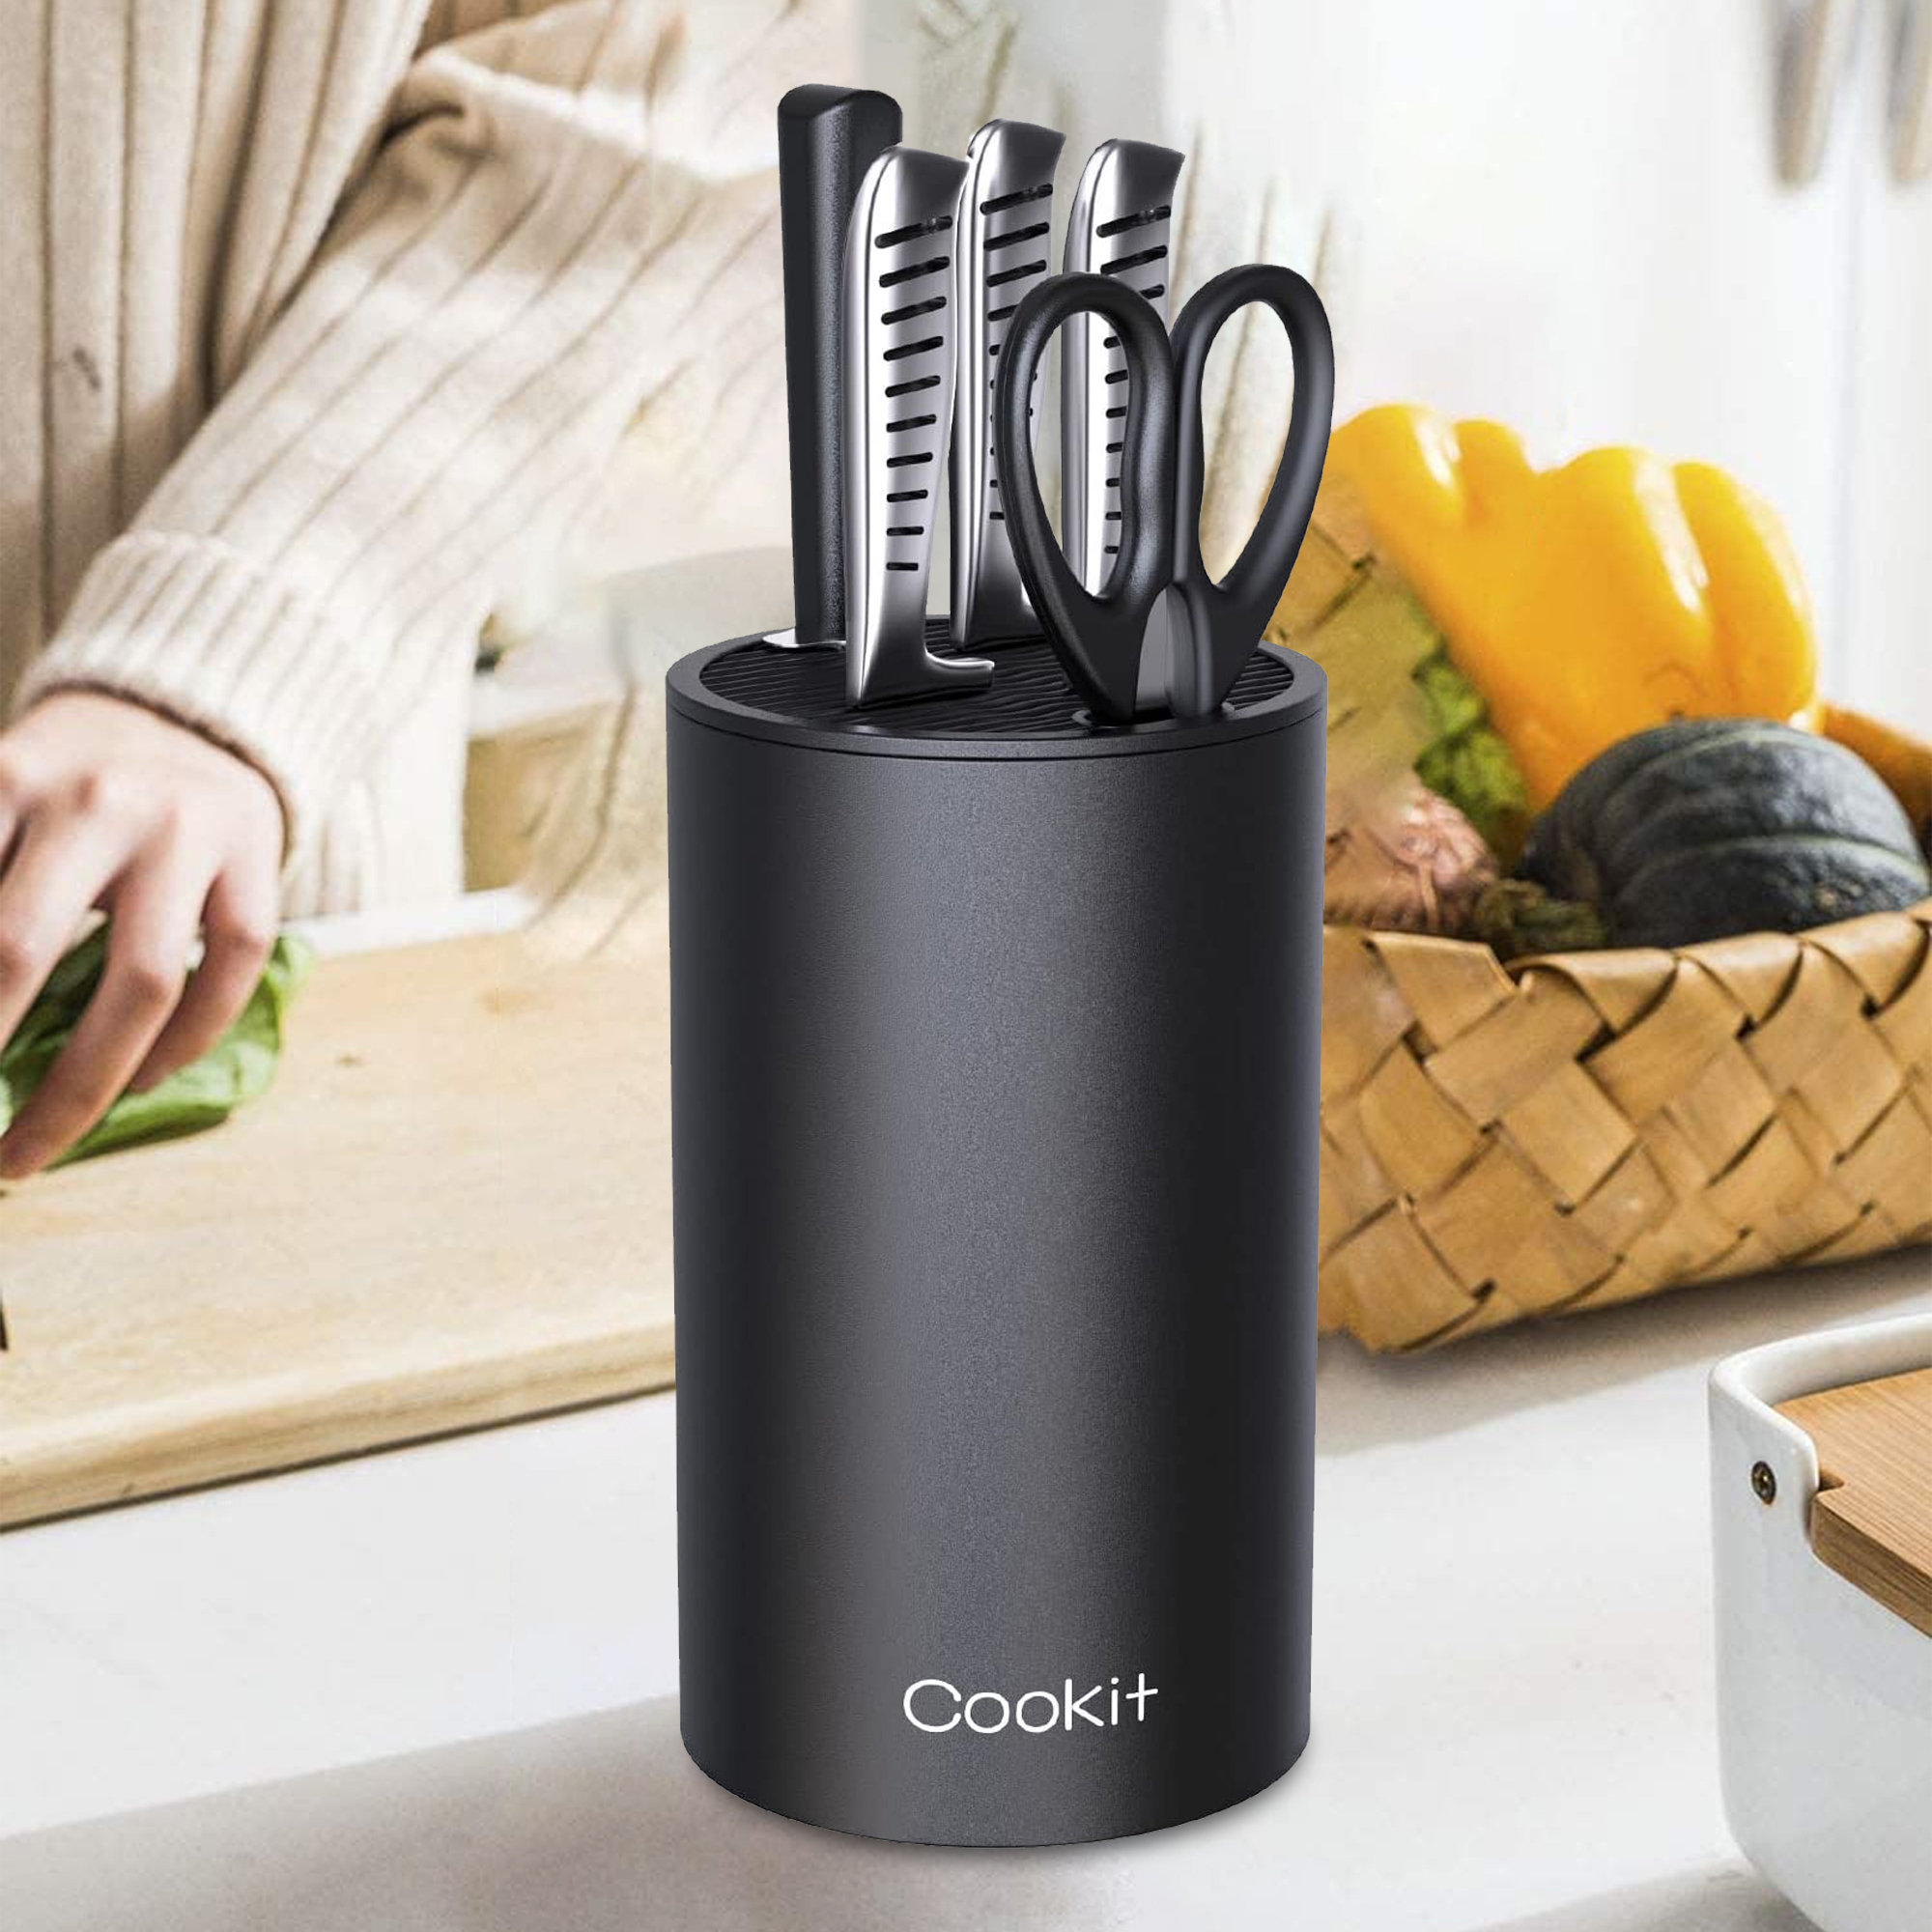  Knife Block Without Knives, Cookit Universal Round Knife Block  Only, Detachable Knife Holder for Easy Cleaning, Space Saver Knife Storage  Holder with Scissors Slot, Black : Home & Kitchen